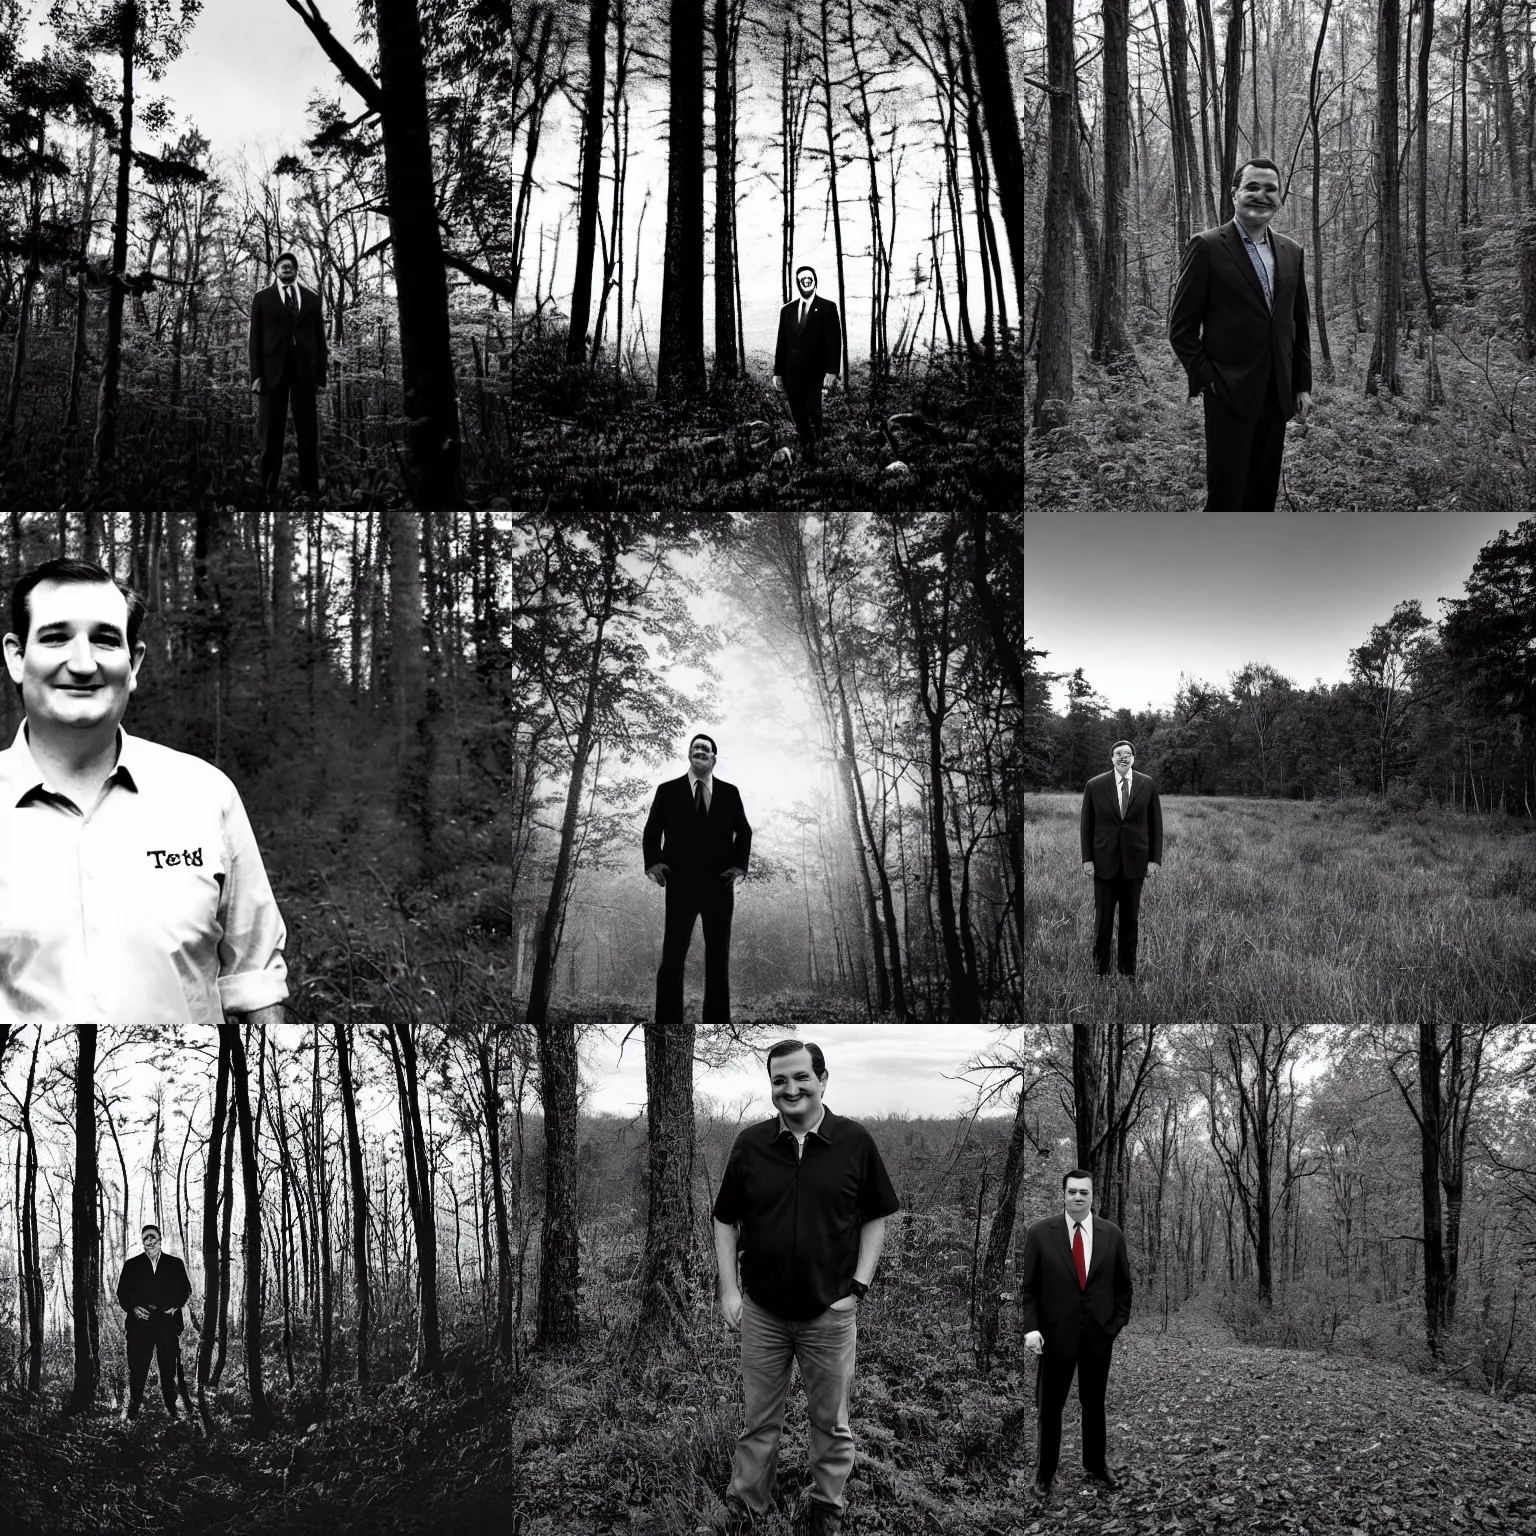 Prompt: ted cruz with a wide grin standing alone in the distance in a dense forest landscape over a twilight sky, black and white, evil, eerie, creepy, lovecraftian